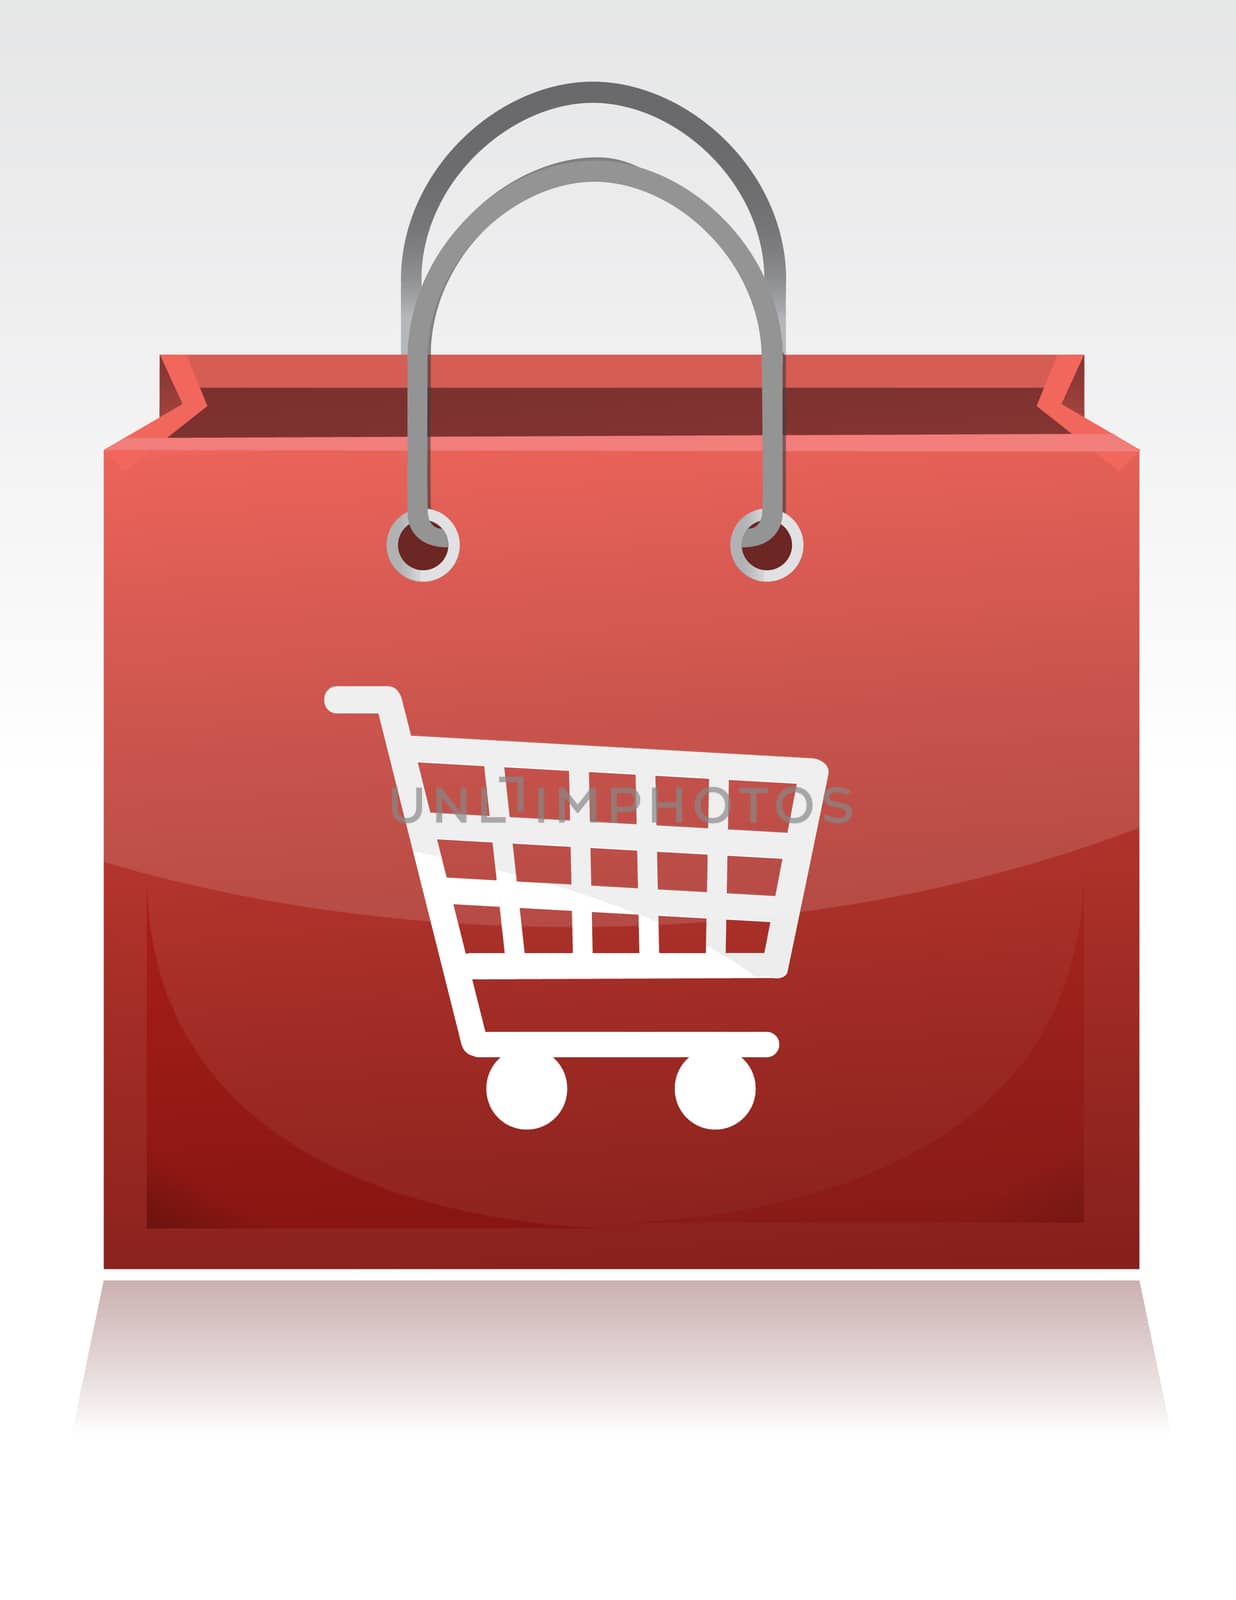 Shopping cart illustration design with a shopping cart design on by alexmillos